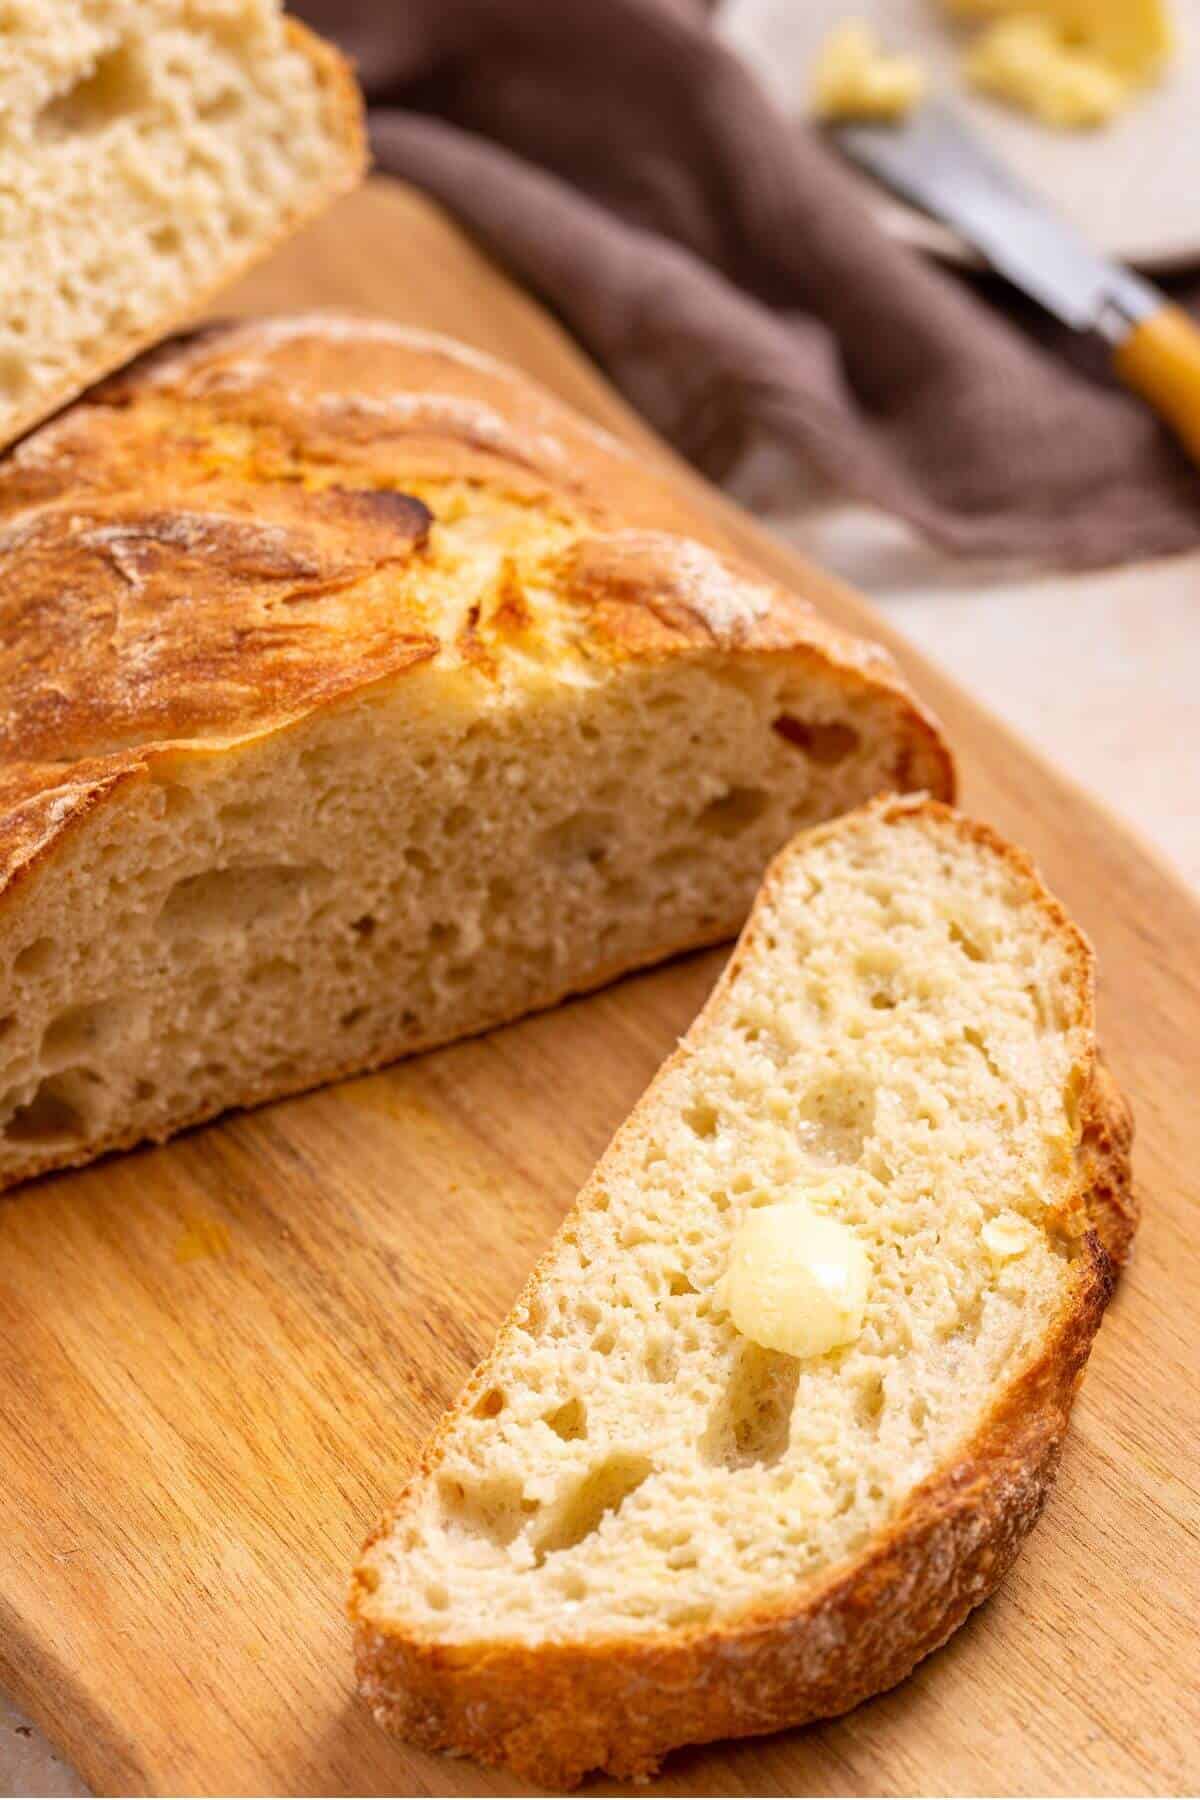 Sliced Italian artisan bread with buttered slice.